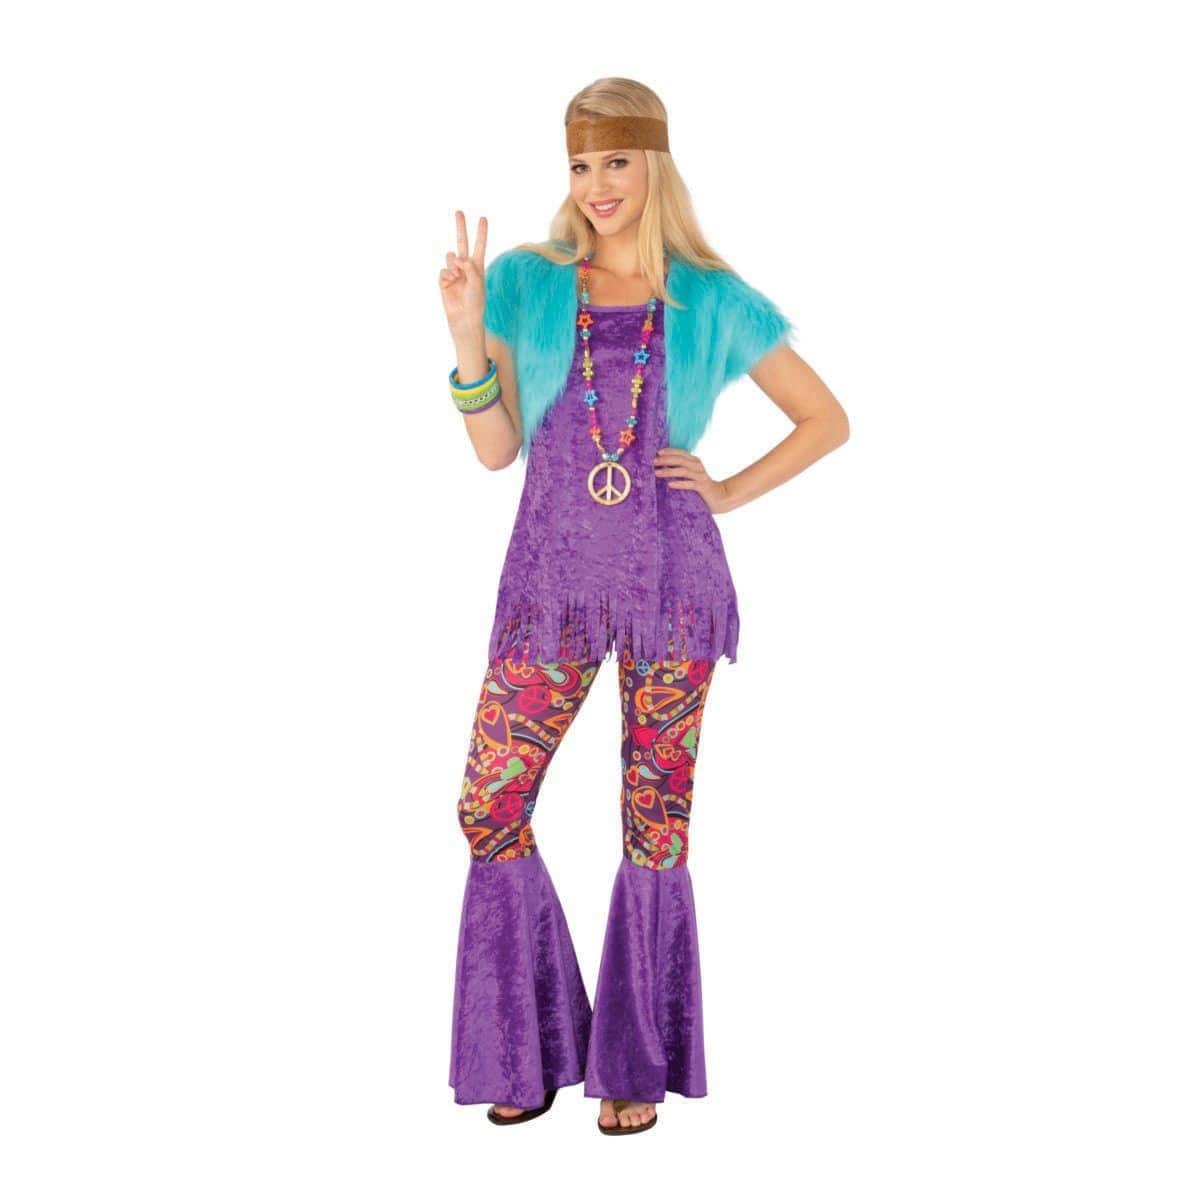 Buy Costumes Groovy Girl Costume for Adults sold at Party Expert